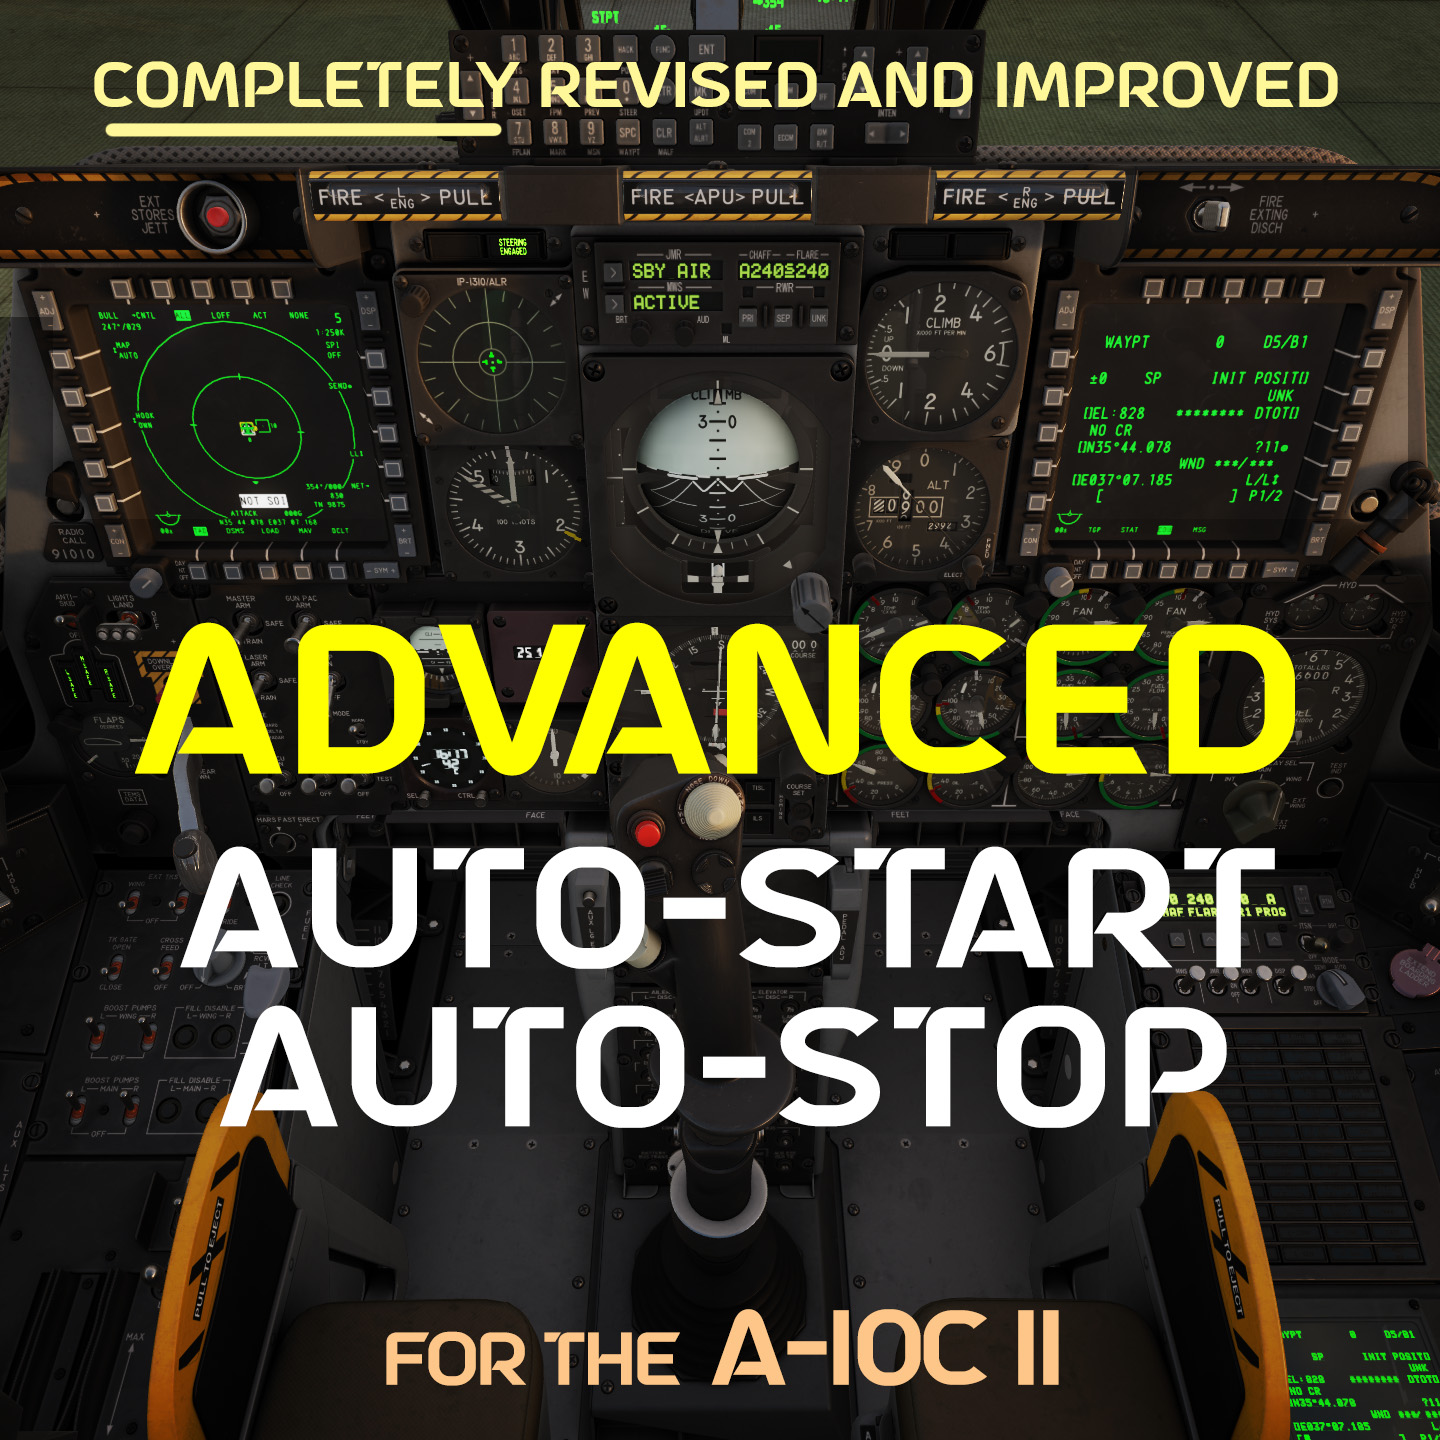 ADVANCED AUTO-START and AUTO-STOP SEQUENCES for the A-10C II